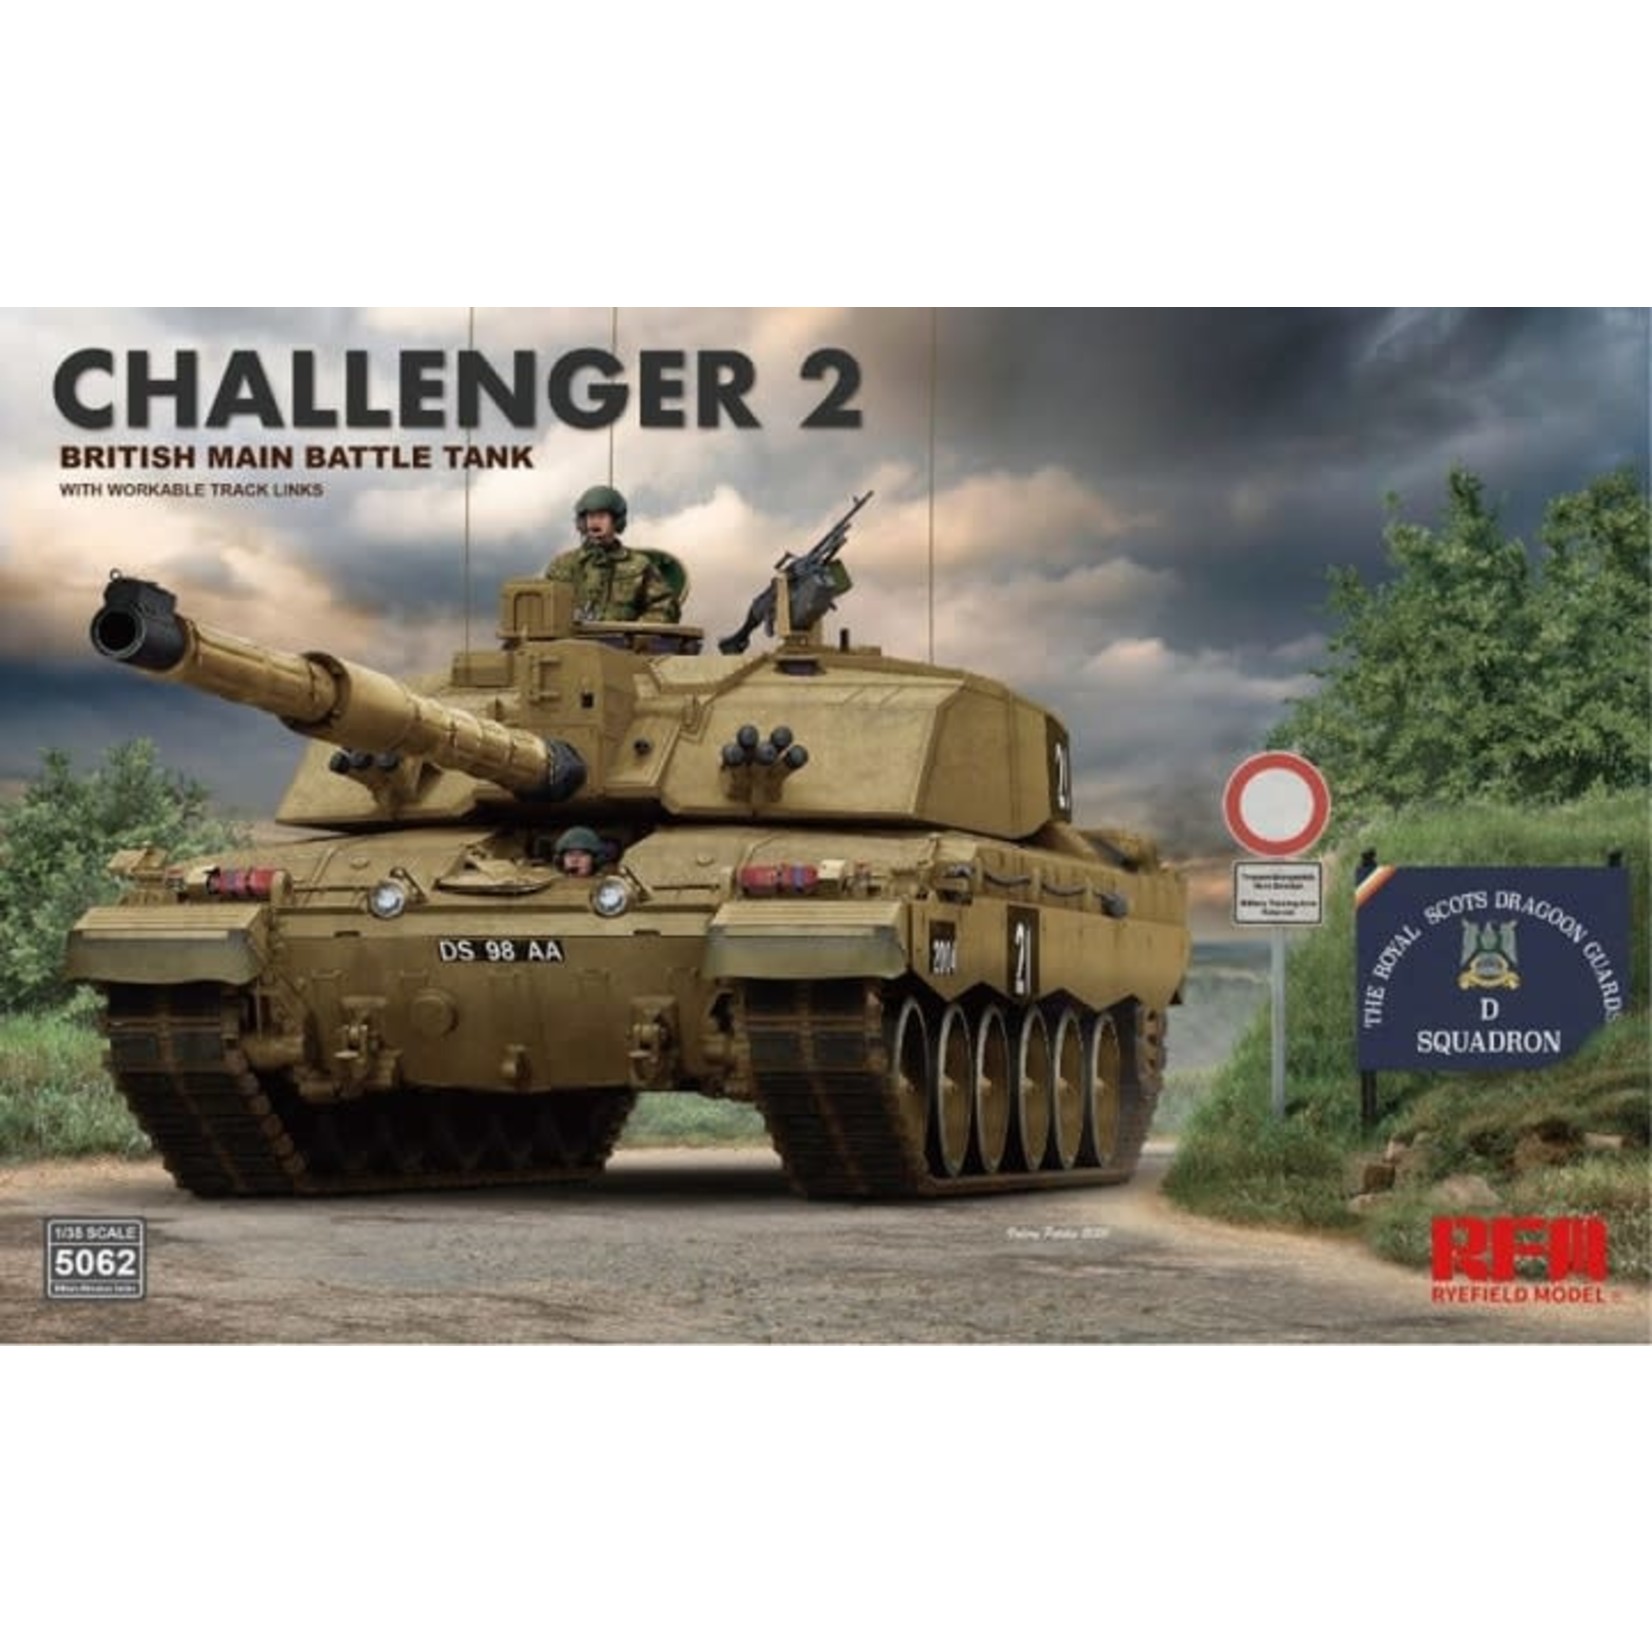 Rye Field Model RFMRM5062 Challenger 2 with Workable Track Links (1/35)